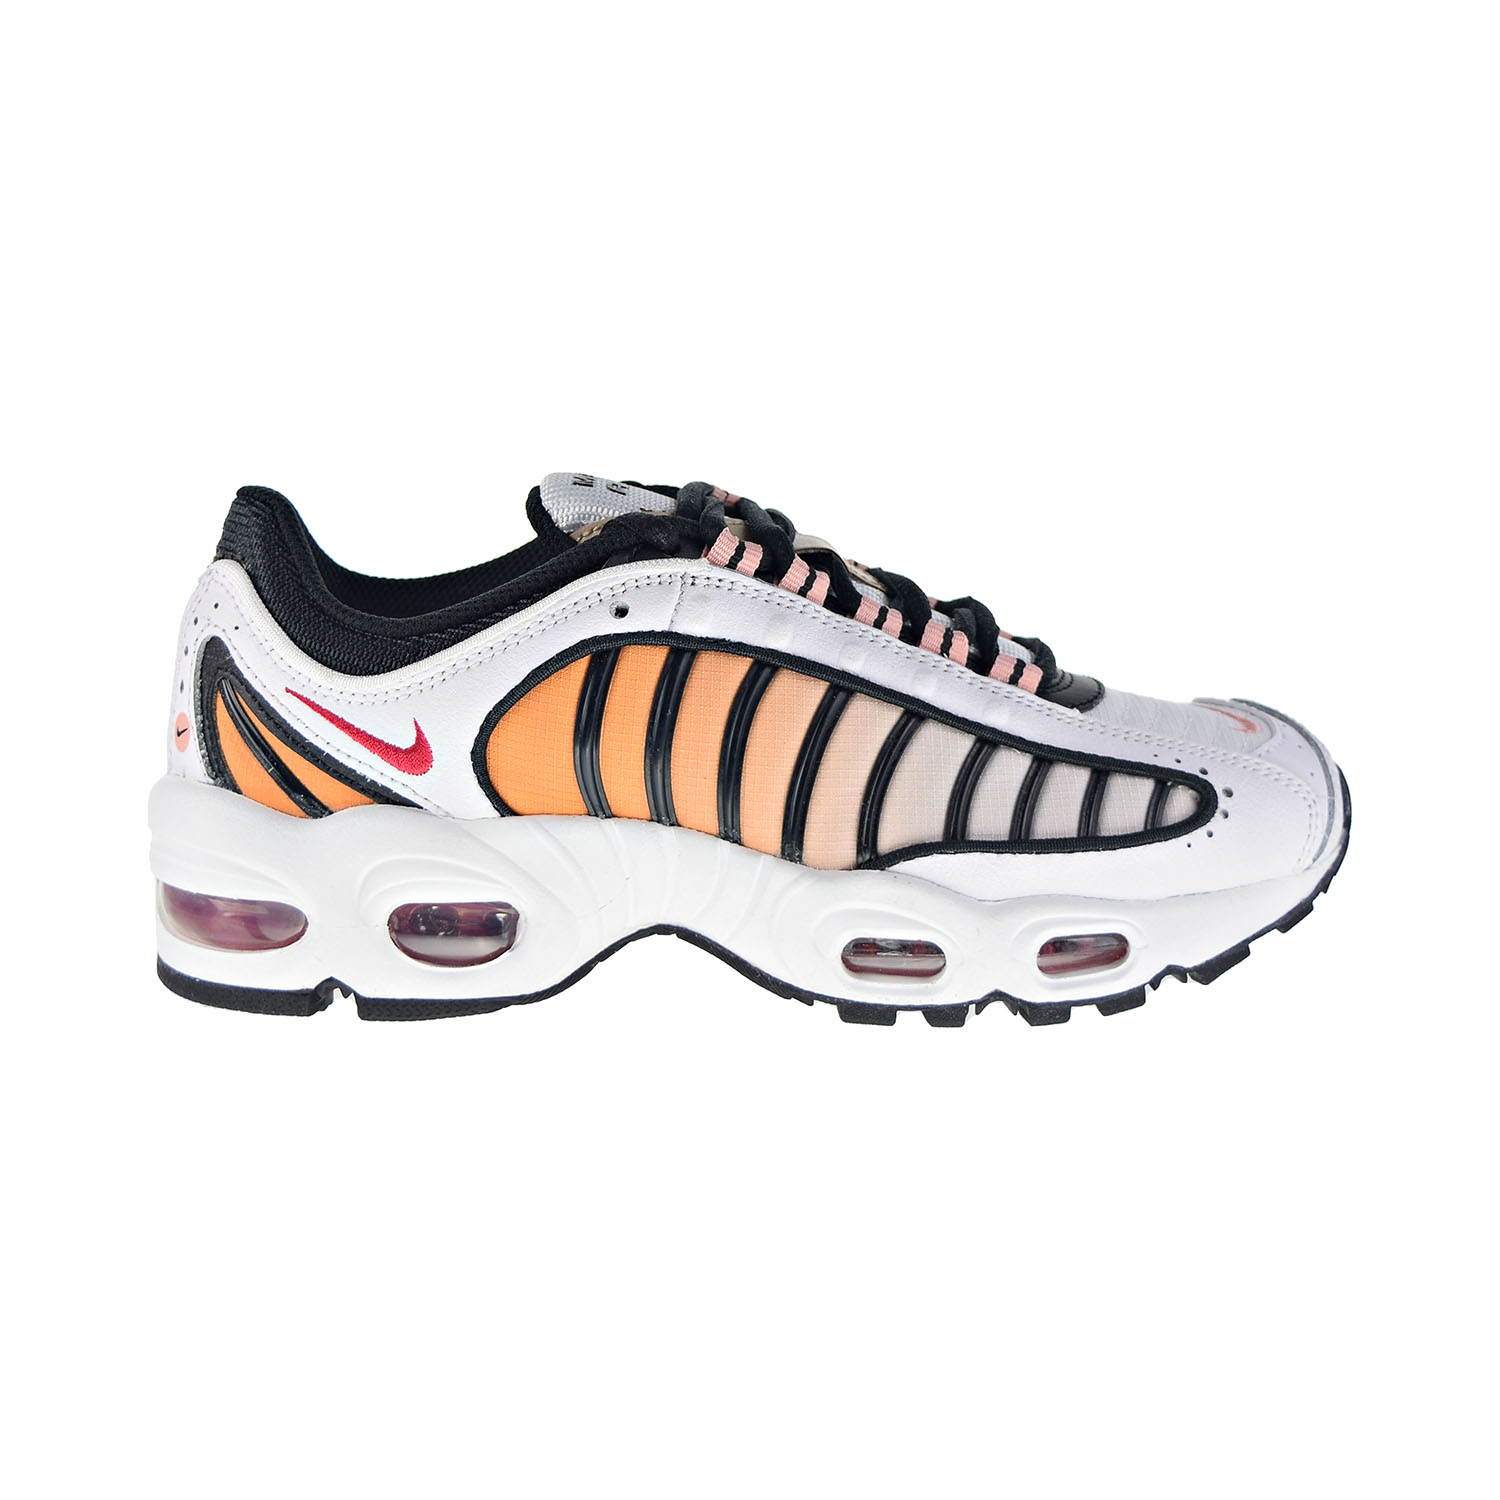 Nike Air Max Tailwind 4 Women's Shoes White-Black-Coral Stardust-Gym Red cj7976-100 - image 1 of 6